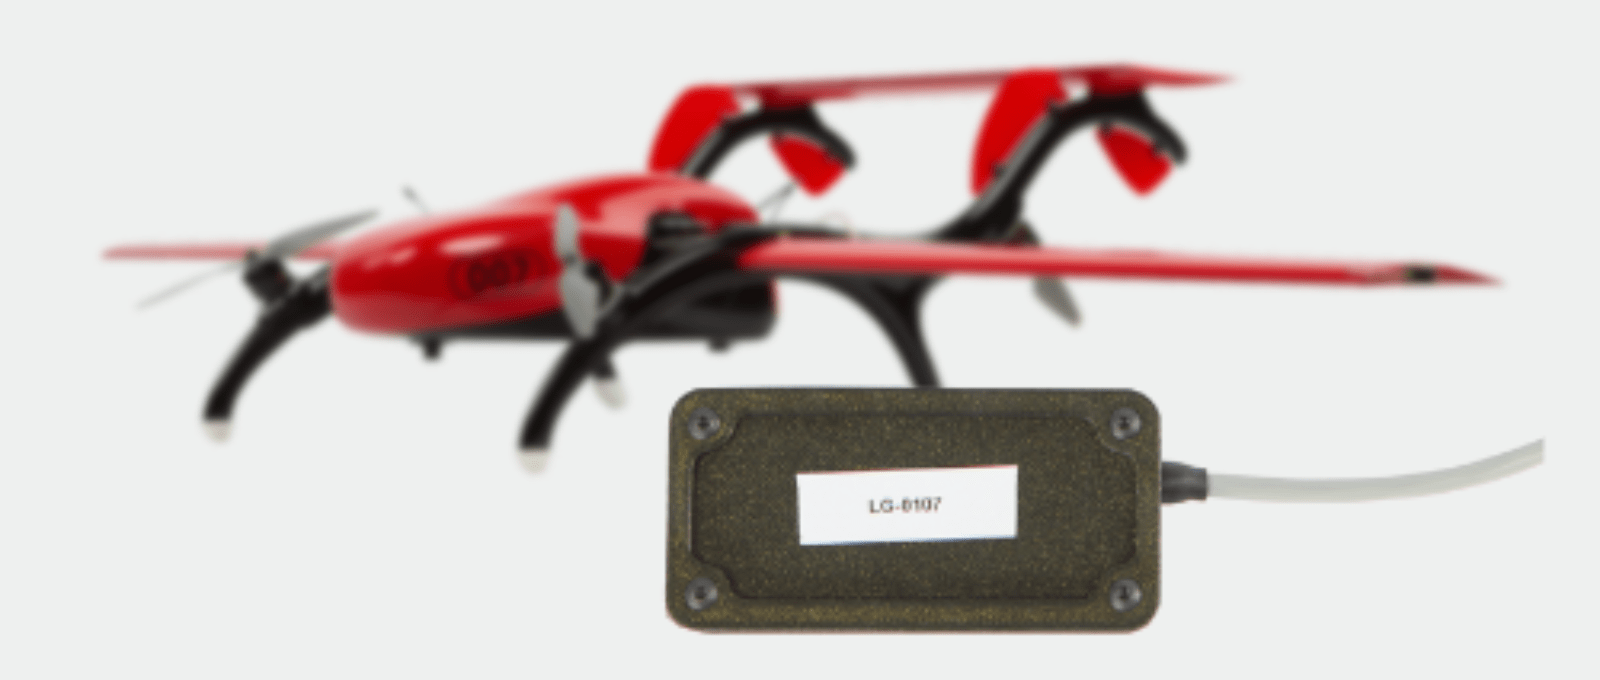 FIXAR equips outdoor UAVs with the BlackBox for safer sky